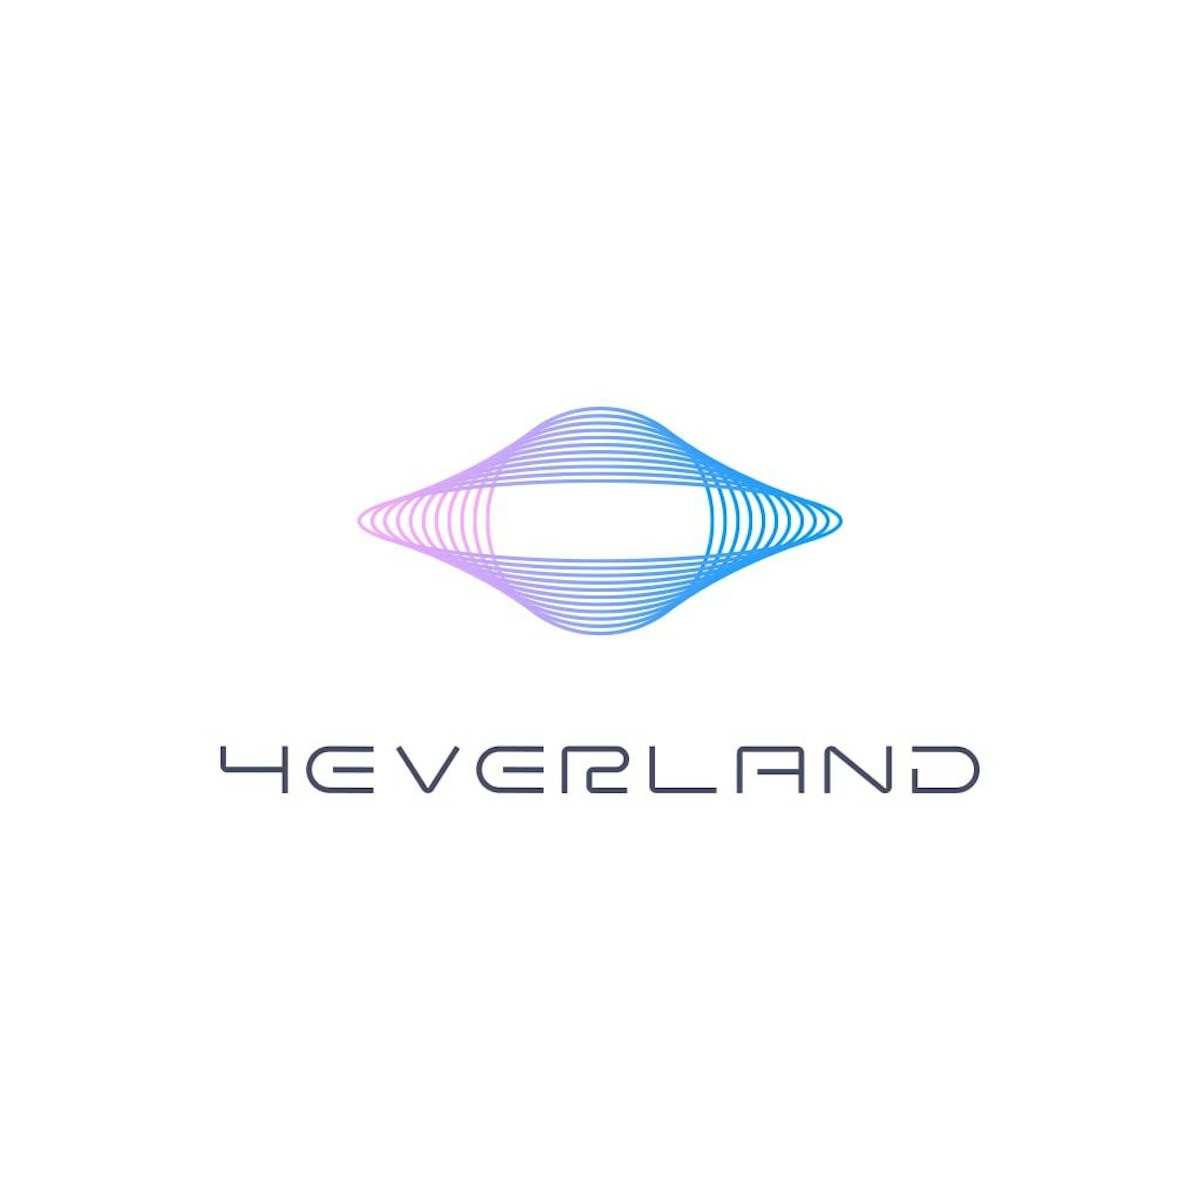 featured image - How to Deploy Your Decentralized Application on 4EVERLAND